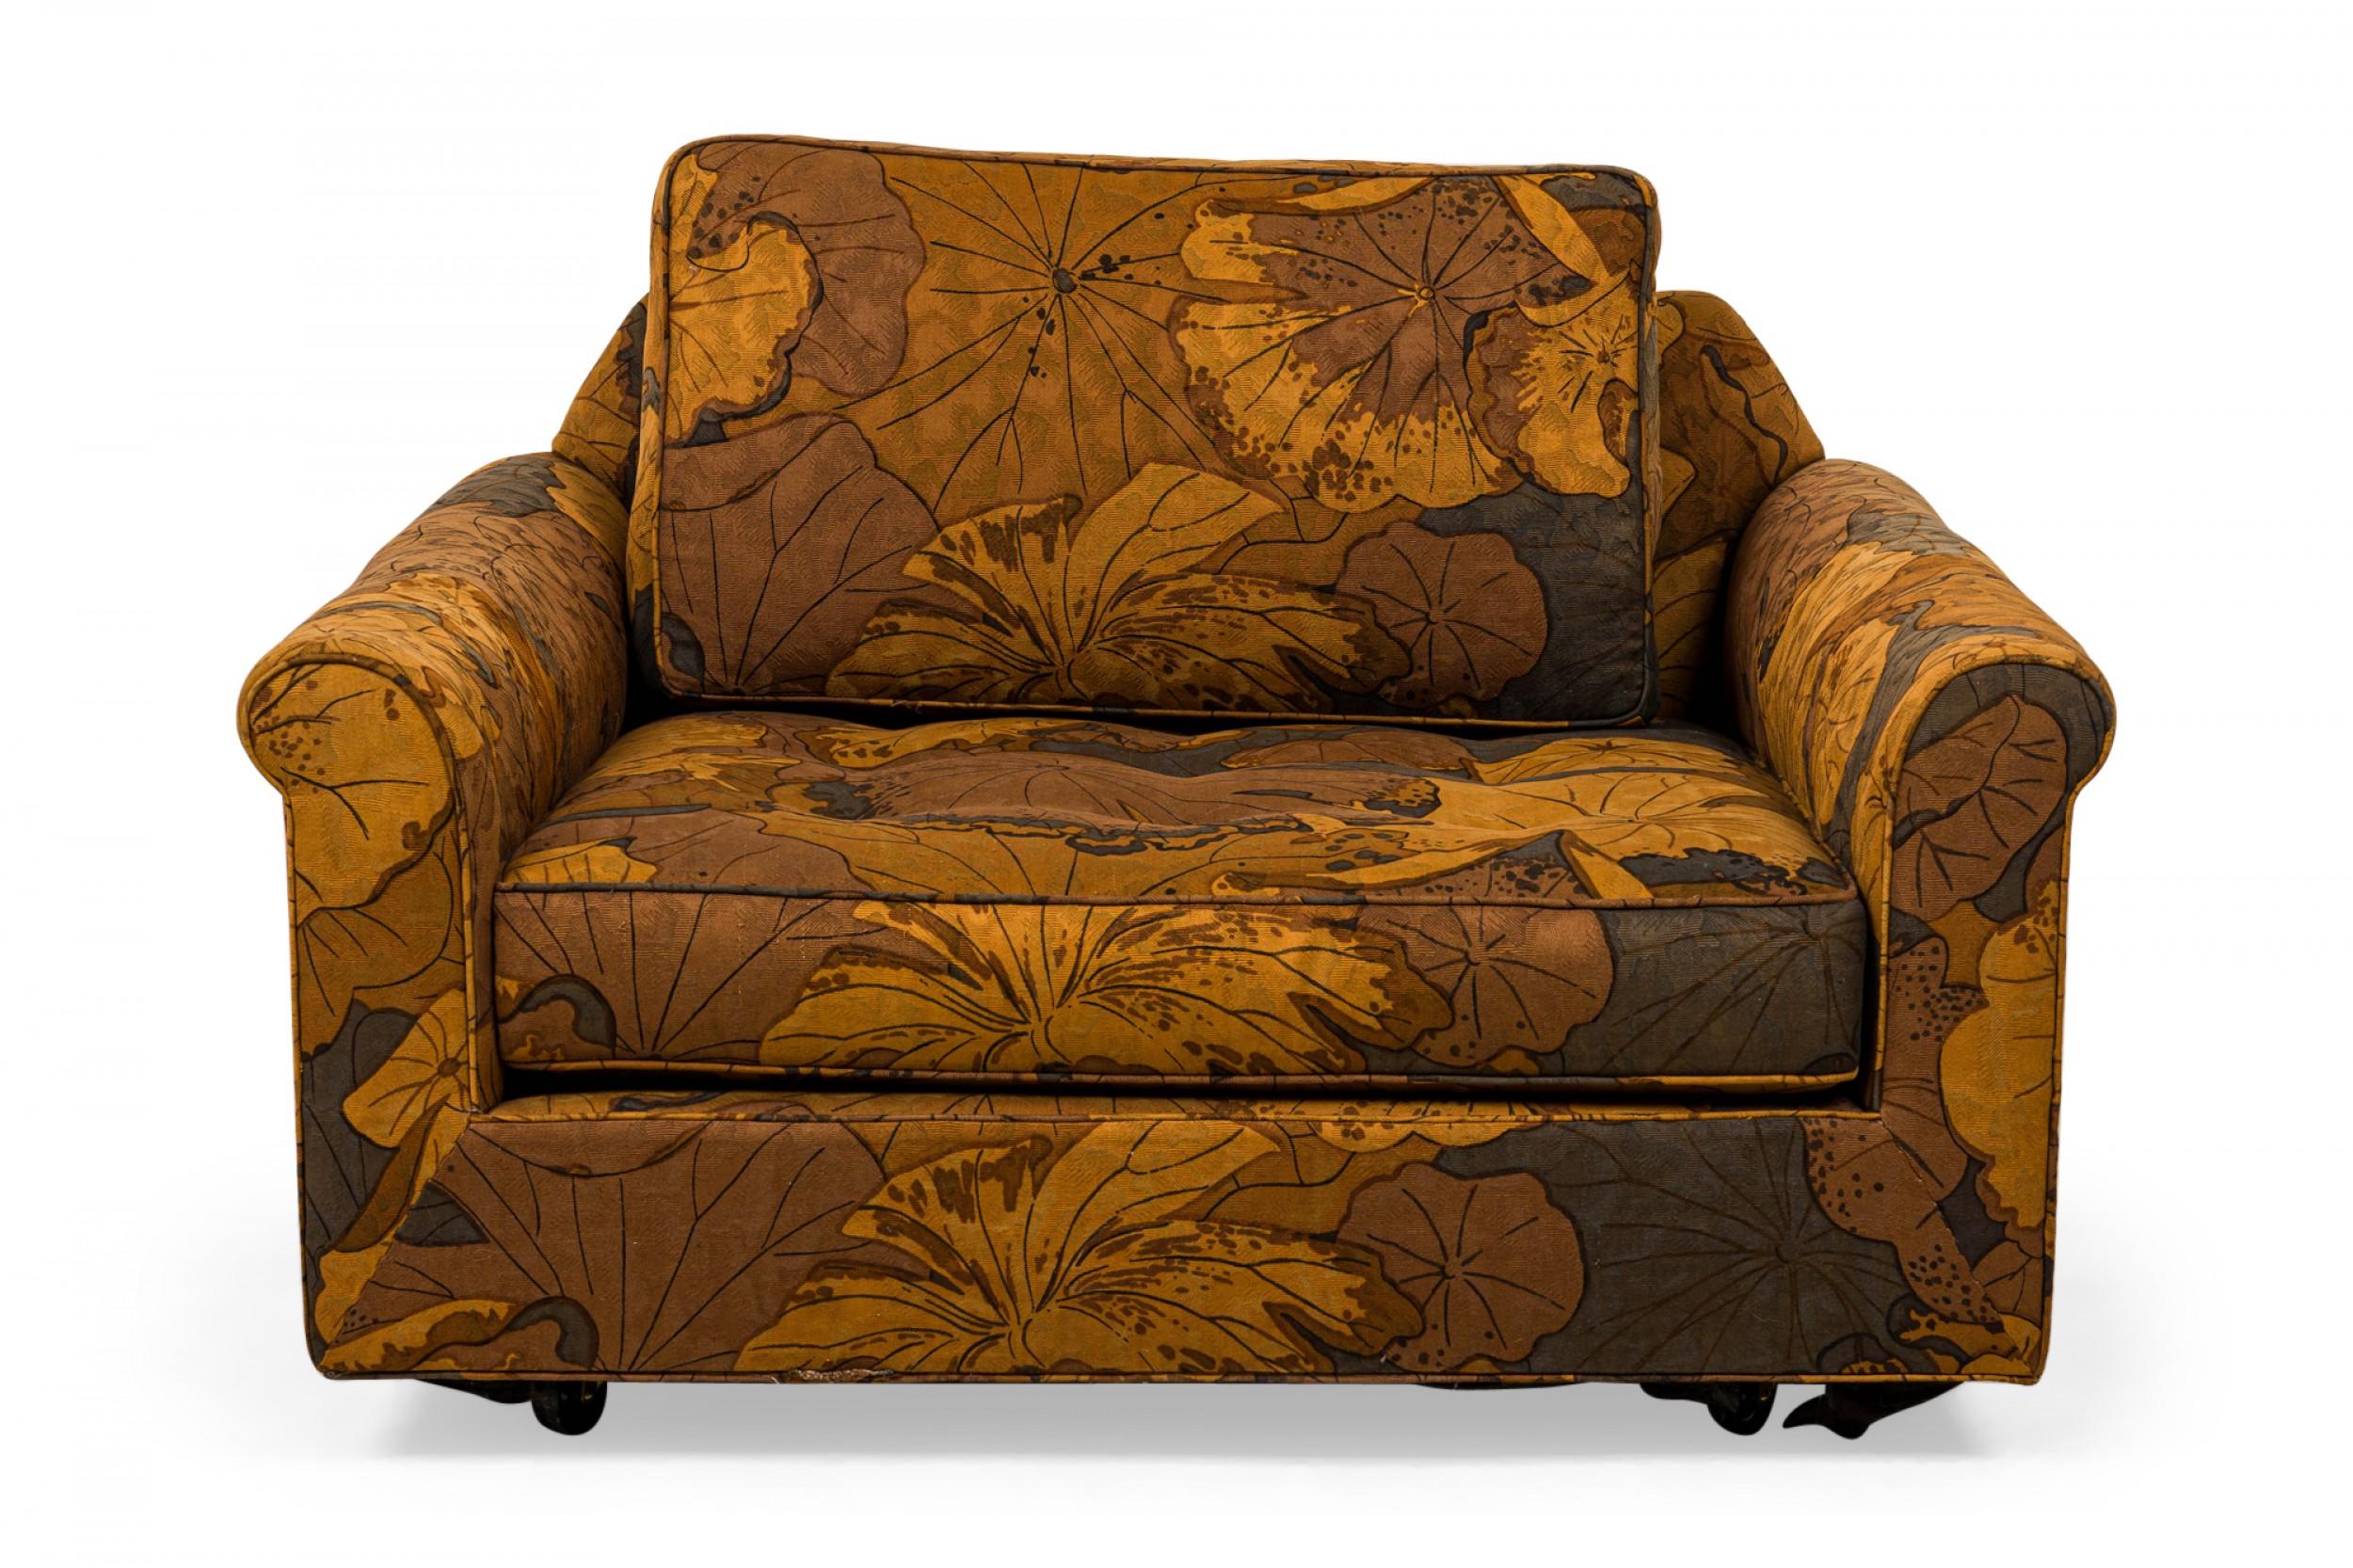 American Mid-Century 'Big Texan' form oversized lounge / armchair with brown leaf patterned fabric upholstery with removable back and seat cushions. (EDWARD WORMLEY FOR DUNBAR FURNITURE COMPANY).
 